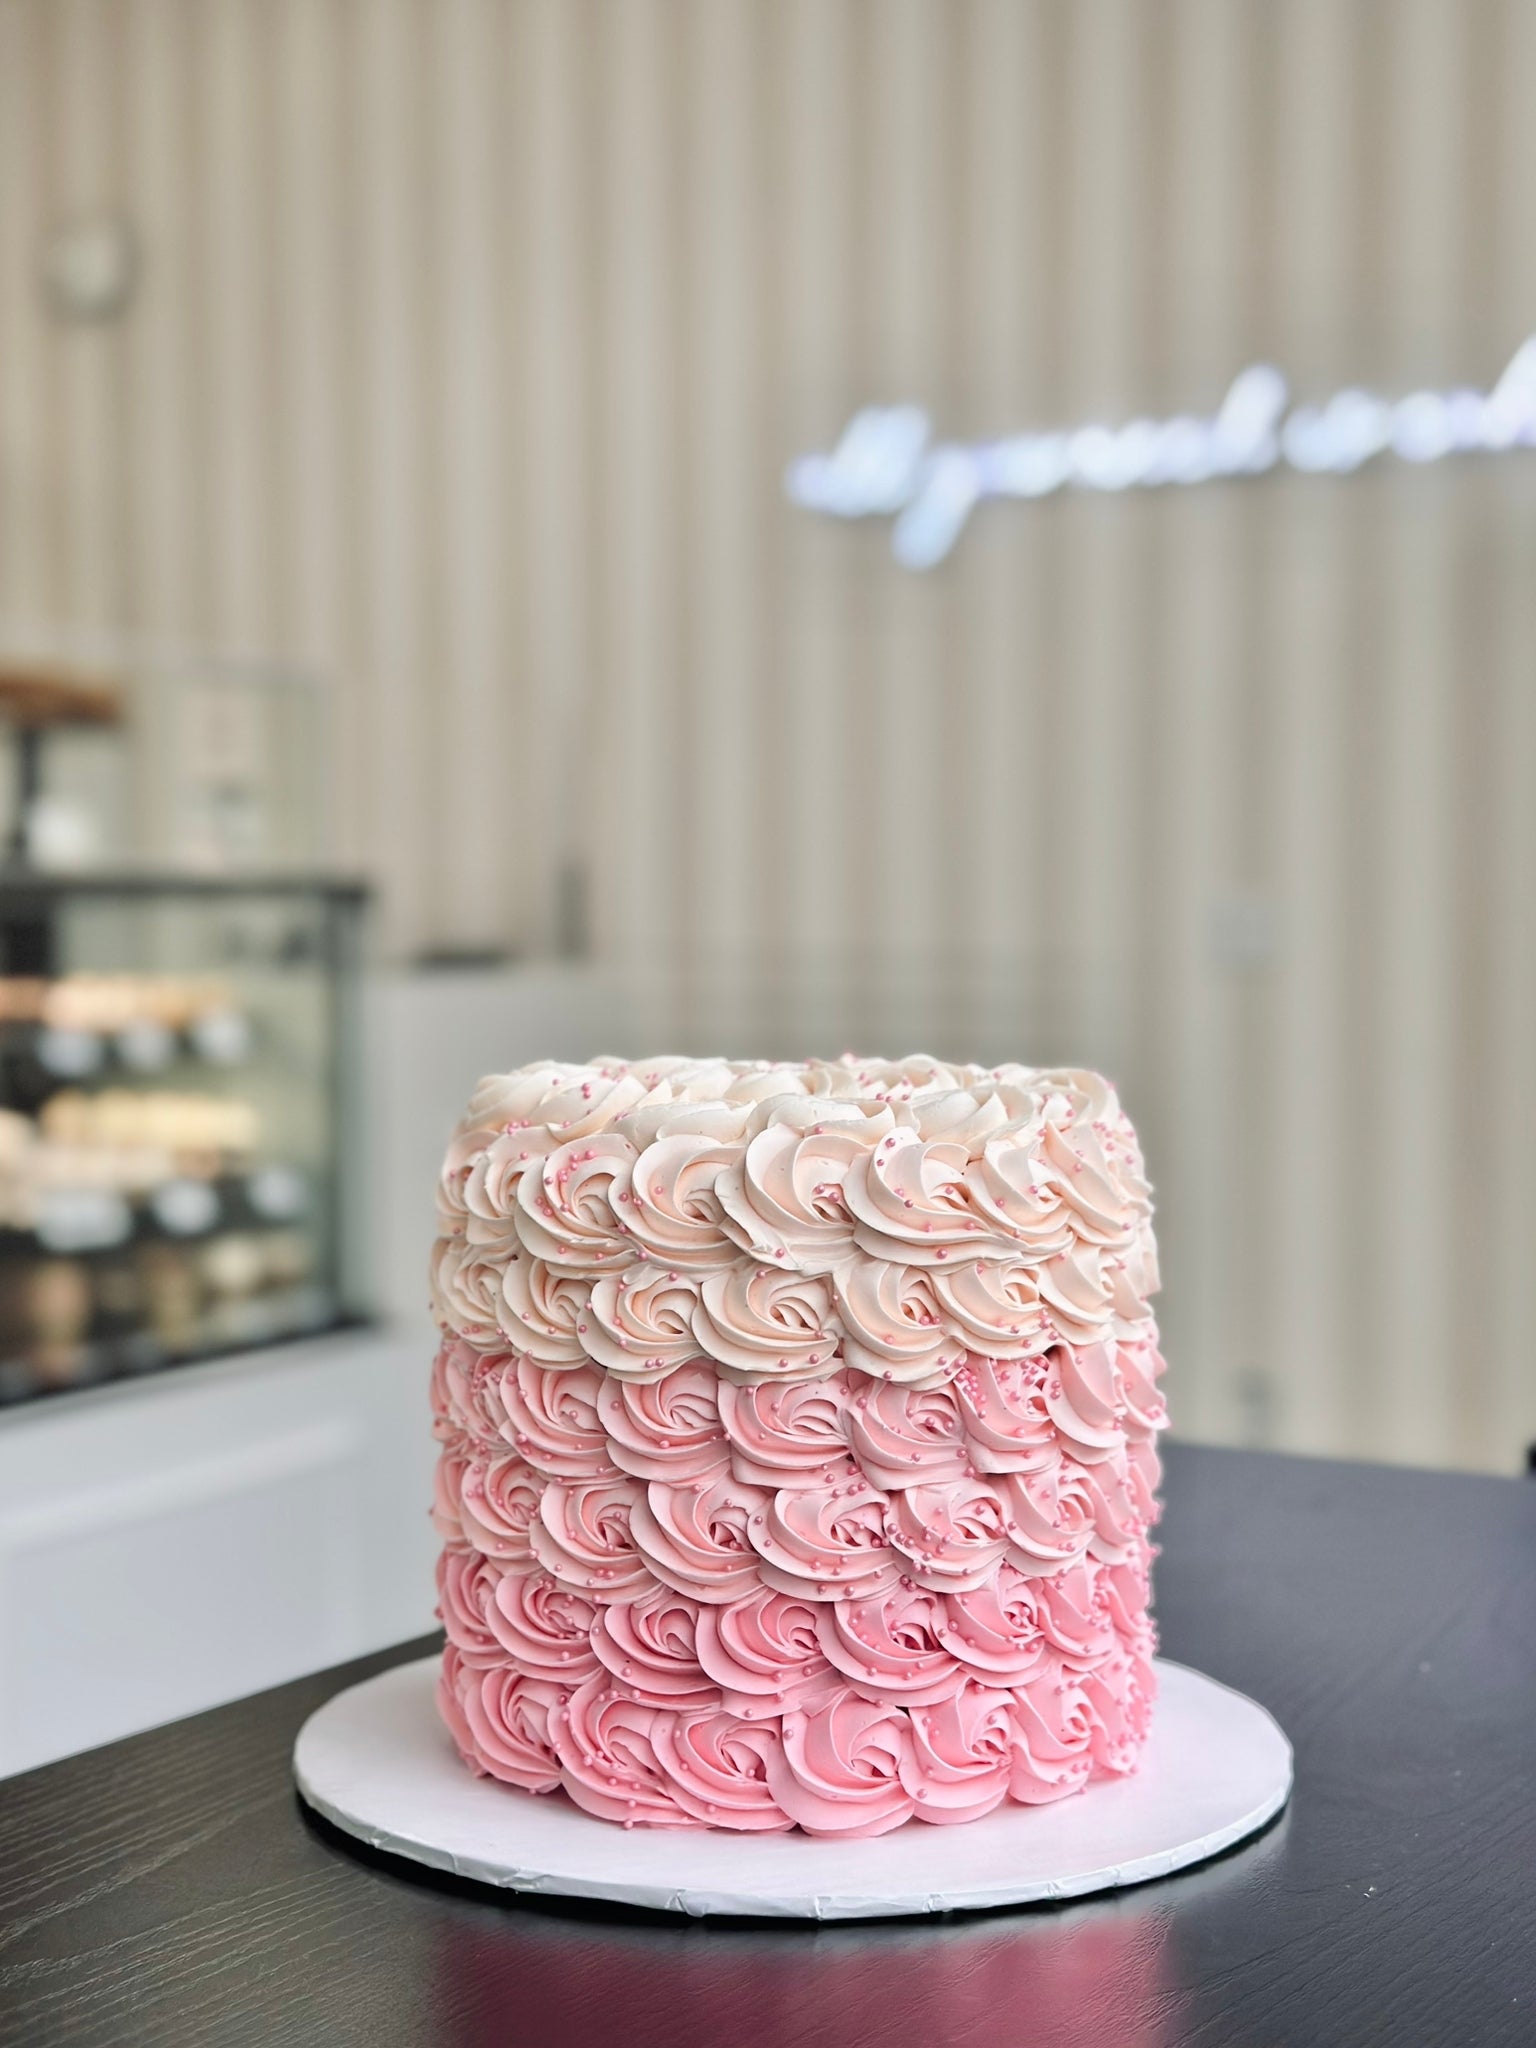 Ombre, Rosette, and Stripe Cakes - Pastries by Randolph